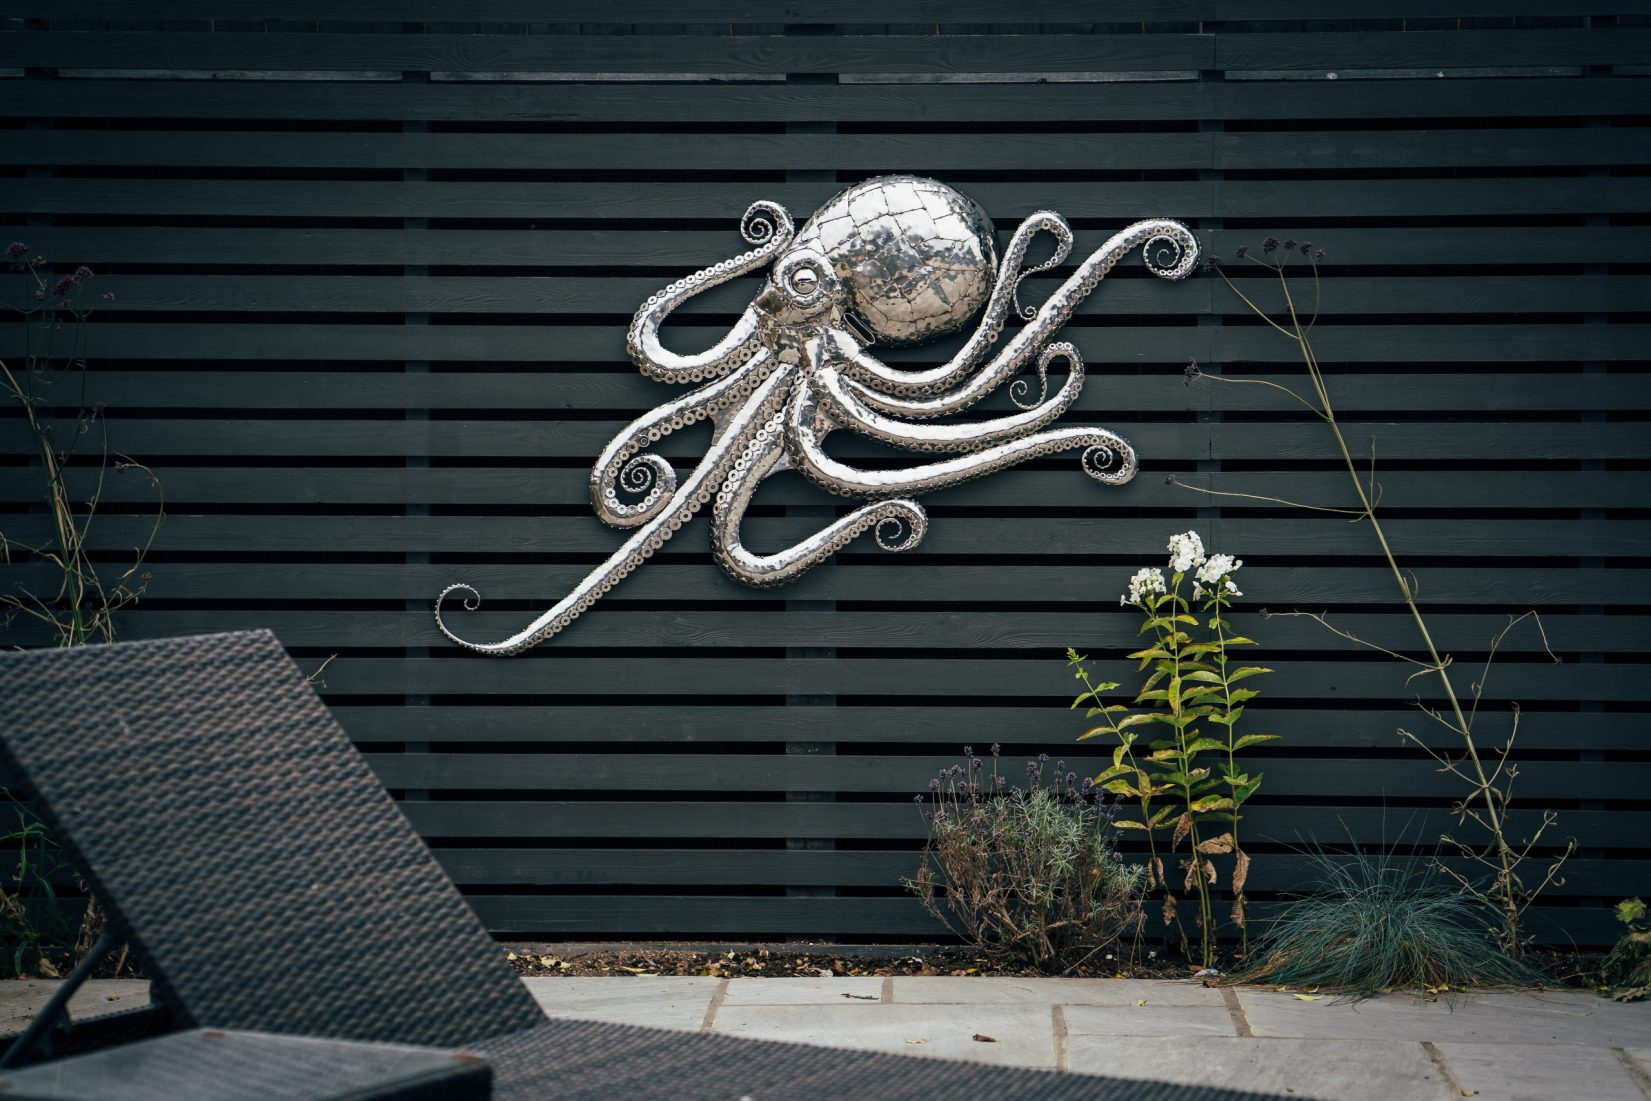 Octopus wall-mounted - Michael Turner sculpture and artwork